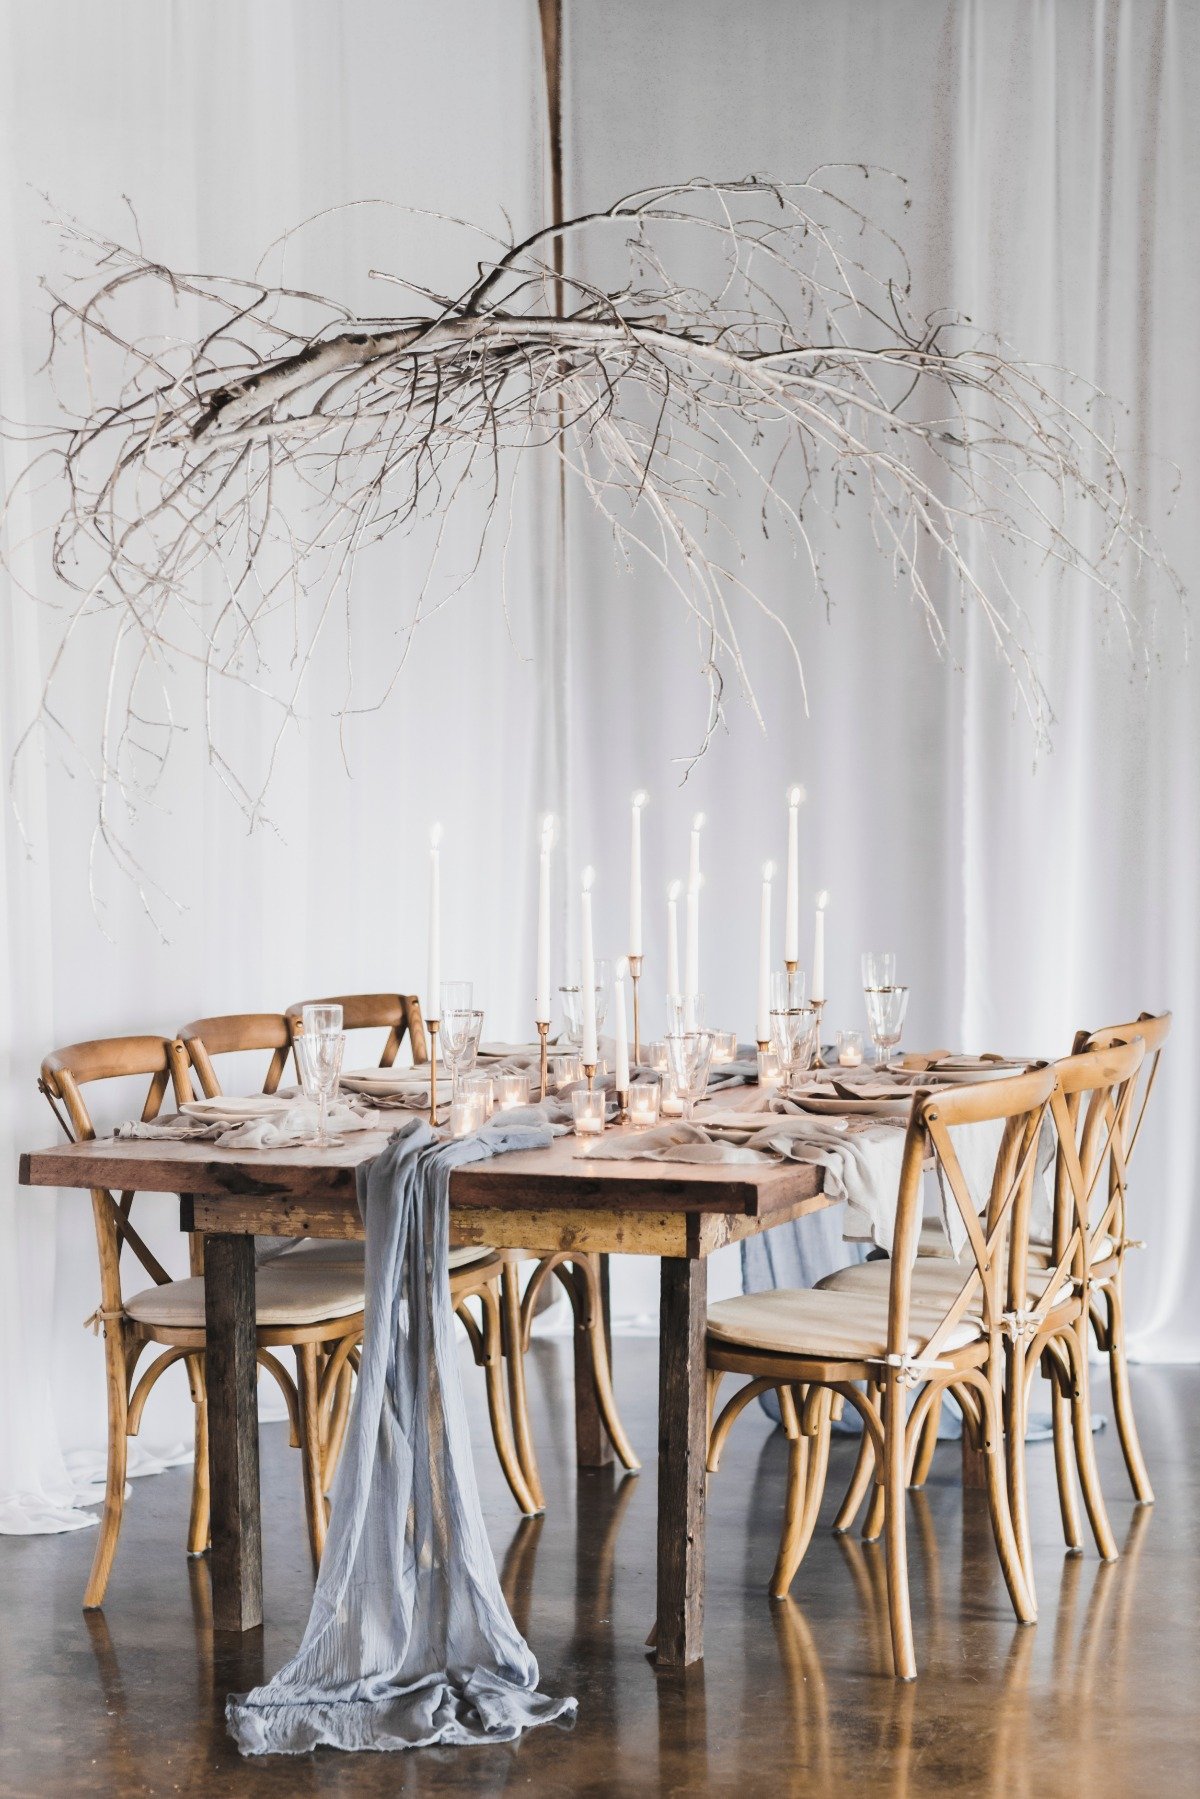 Rustic candle lit table decor